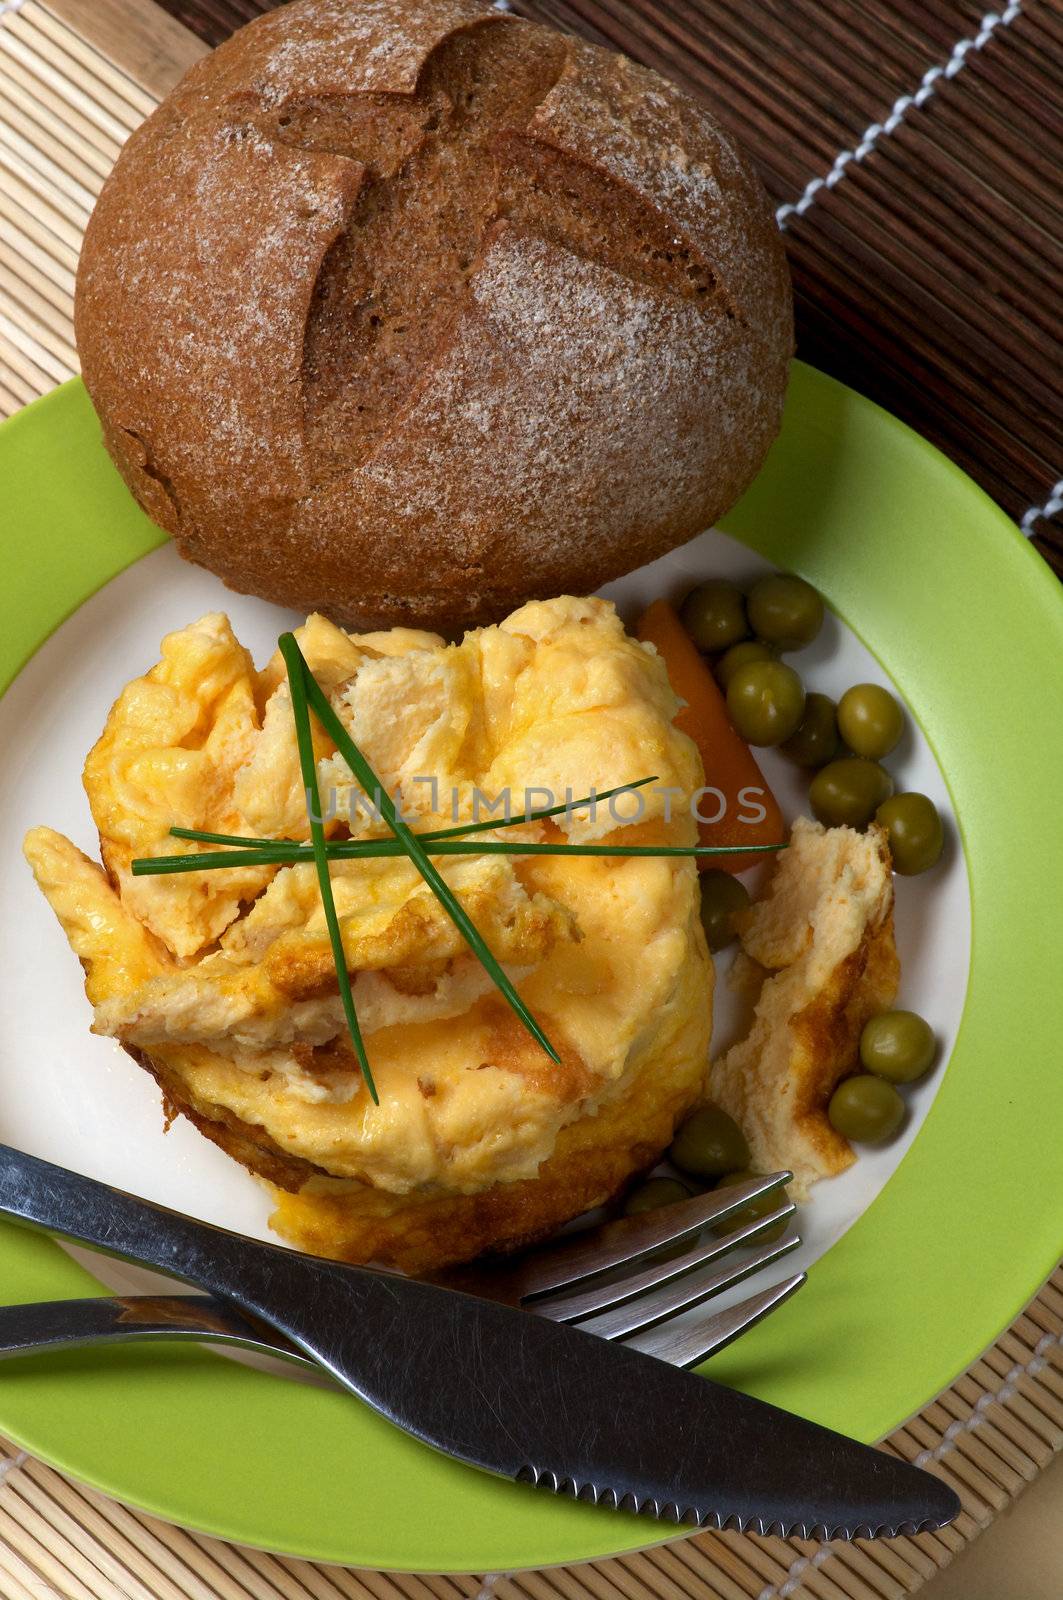 Fluffy Omelet, Carrot and Bun on Green Plate closeup